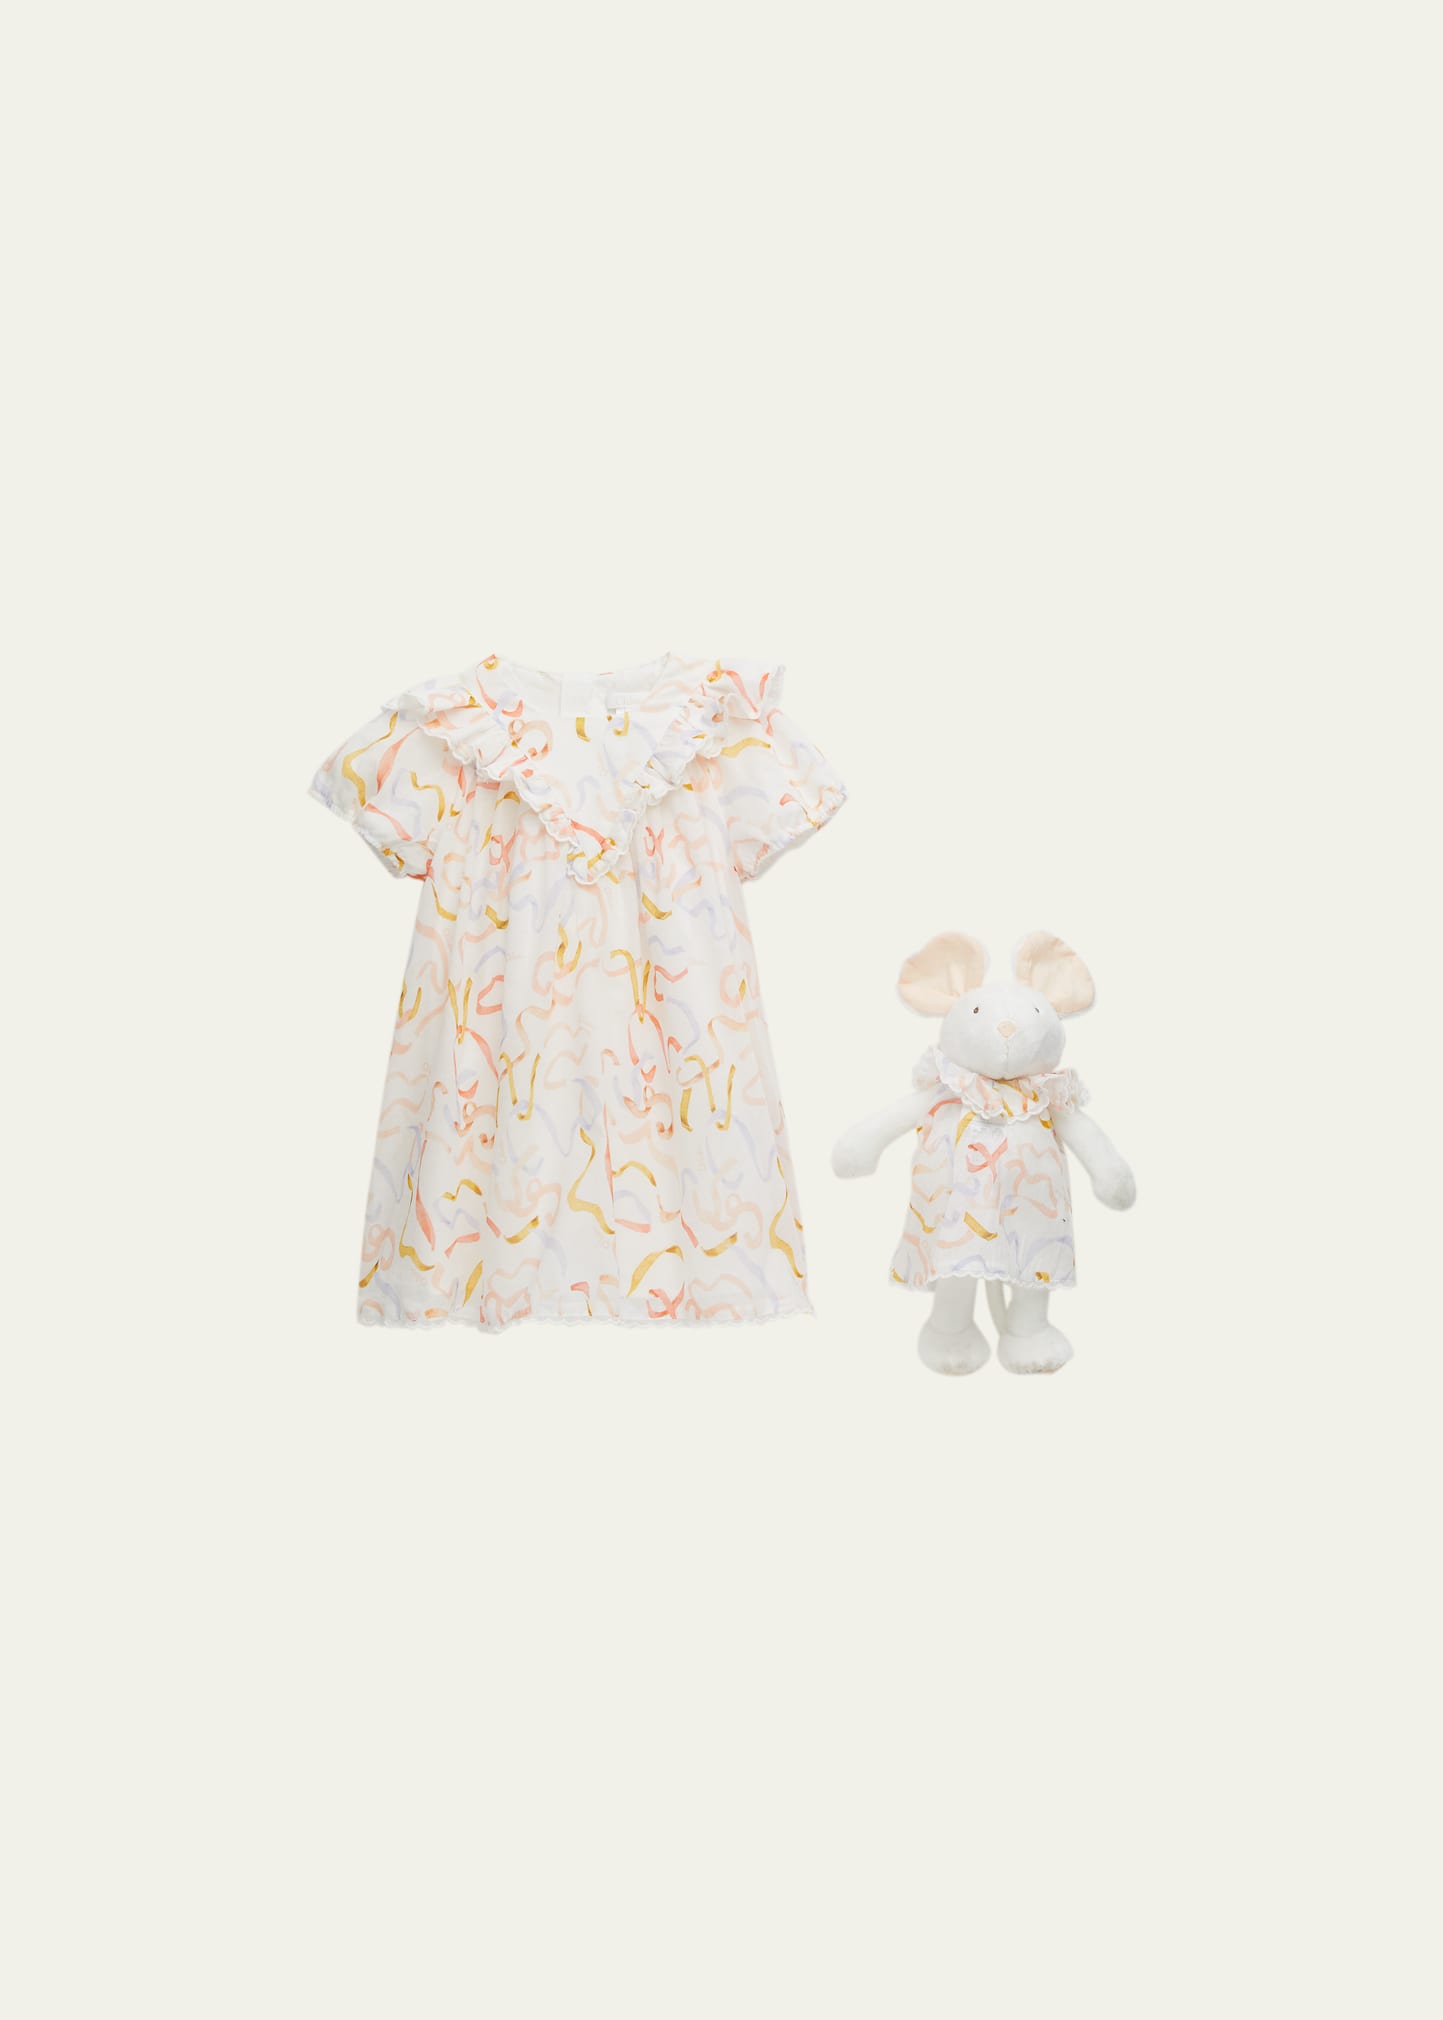 Girl's Multicolor Ribbons-Print Dress & Toy Two-Piece Set, Size Newborn-18M